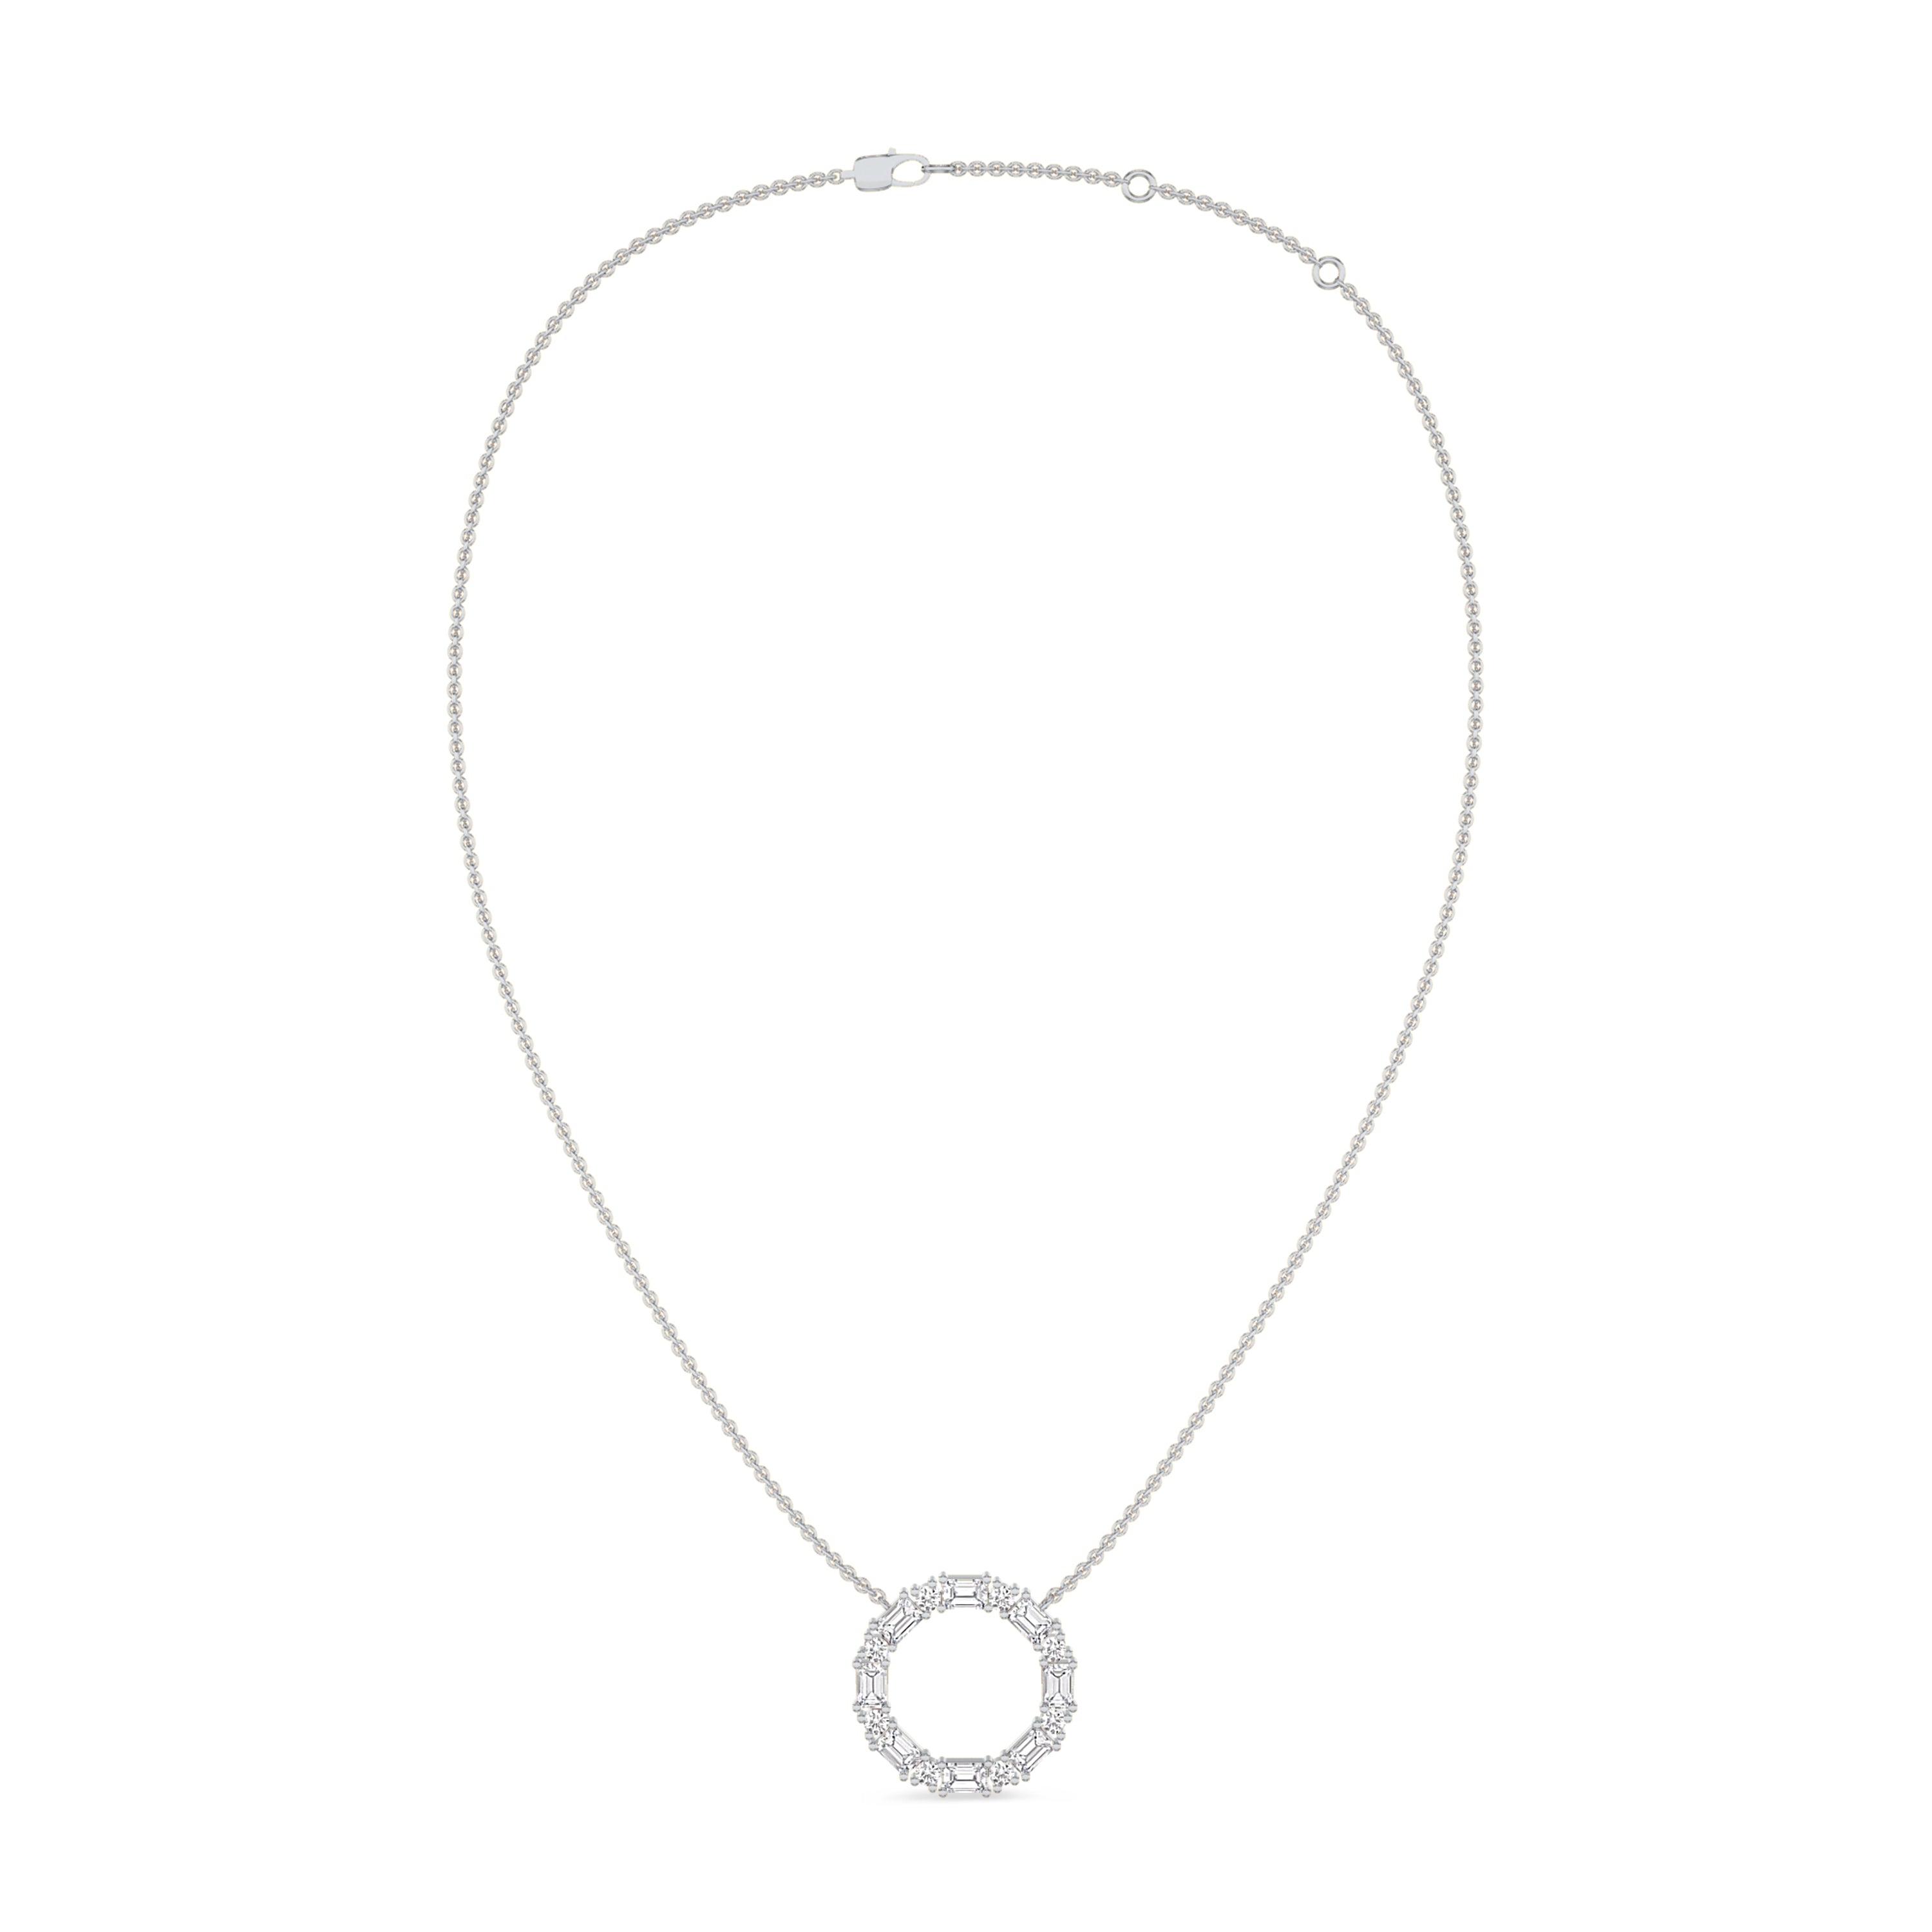 orbit diamond necklace in 0.97 carats, 18K white gold, FG color and VS-SI clarity